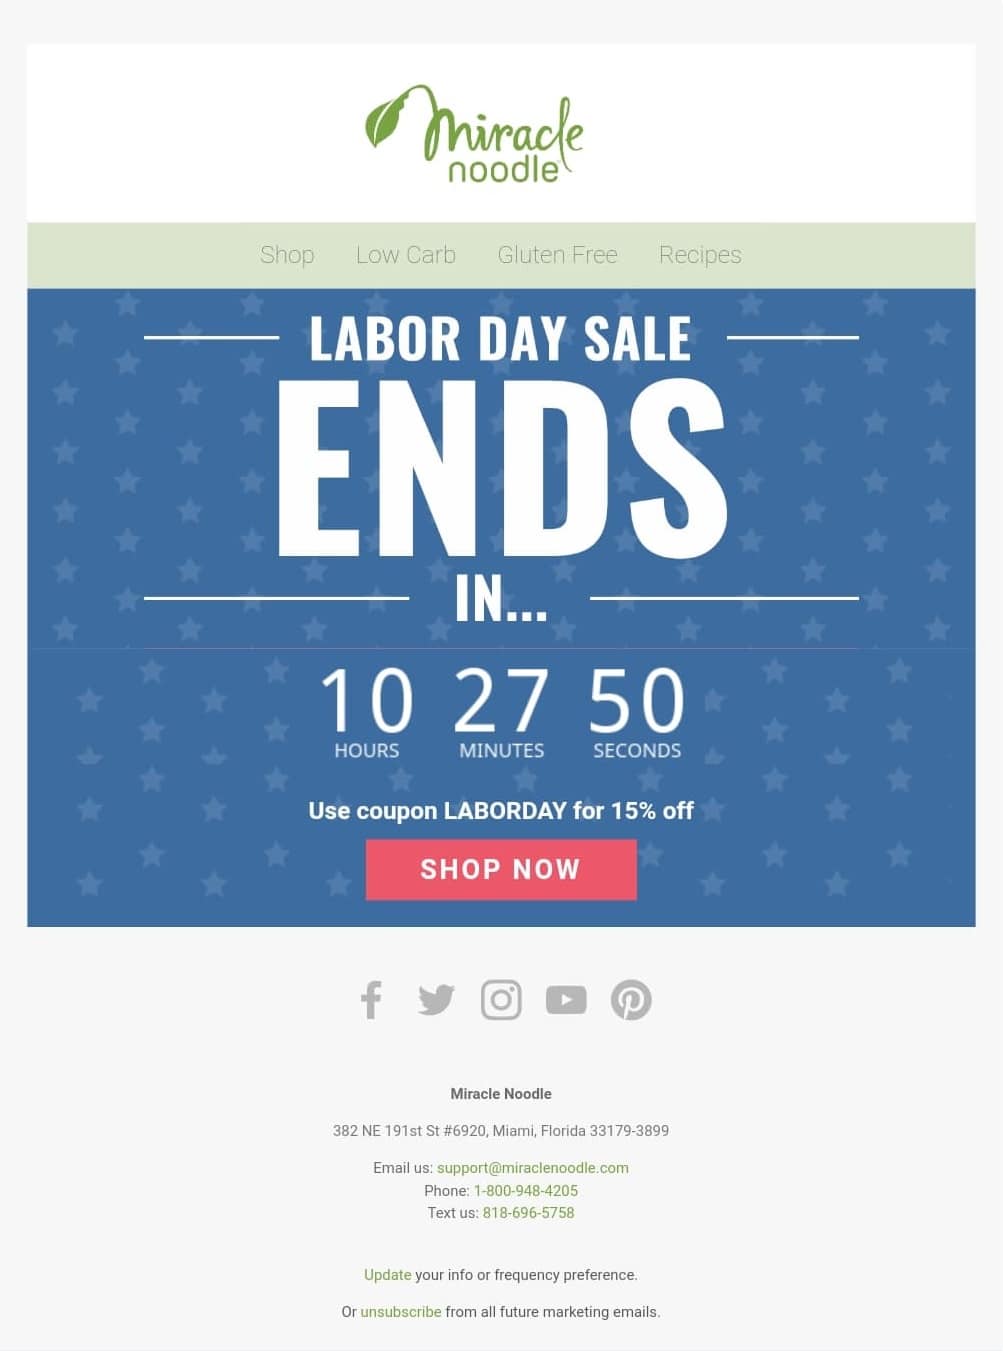 This Labor Day example stands out thanks to its simplicity and countdown timer, urging readers to take action.